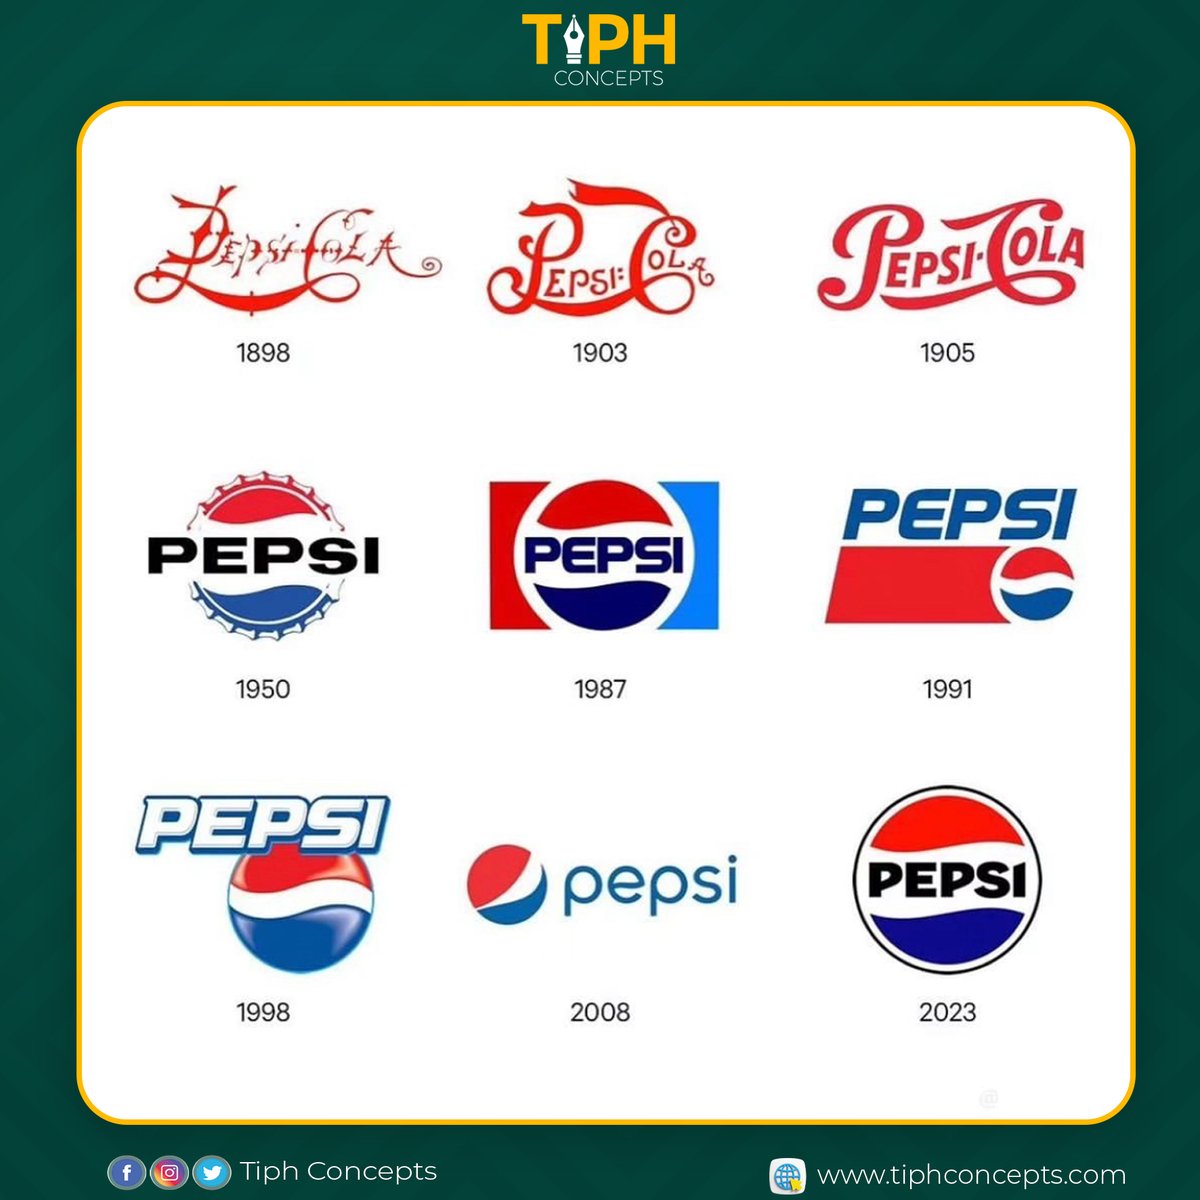 Logo evolution through the years. #mubs #uncle #pepsi #ikea